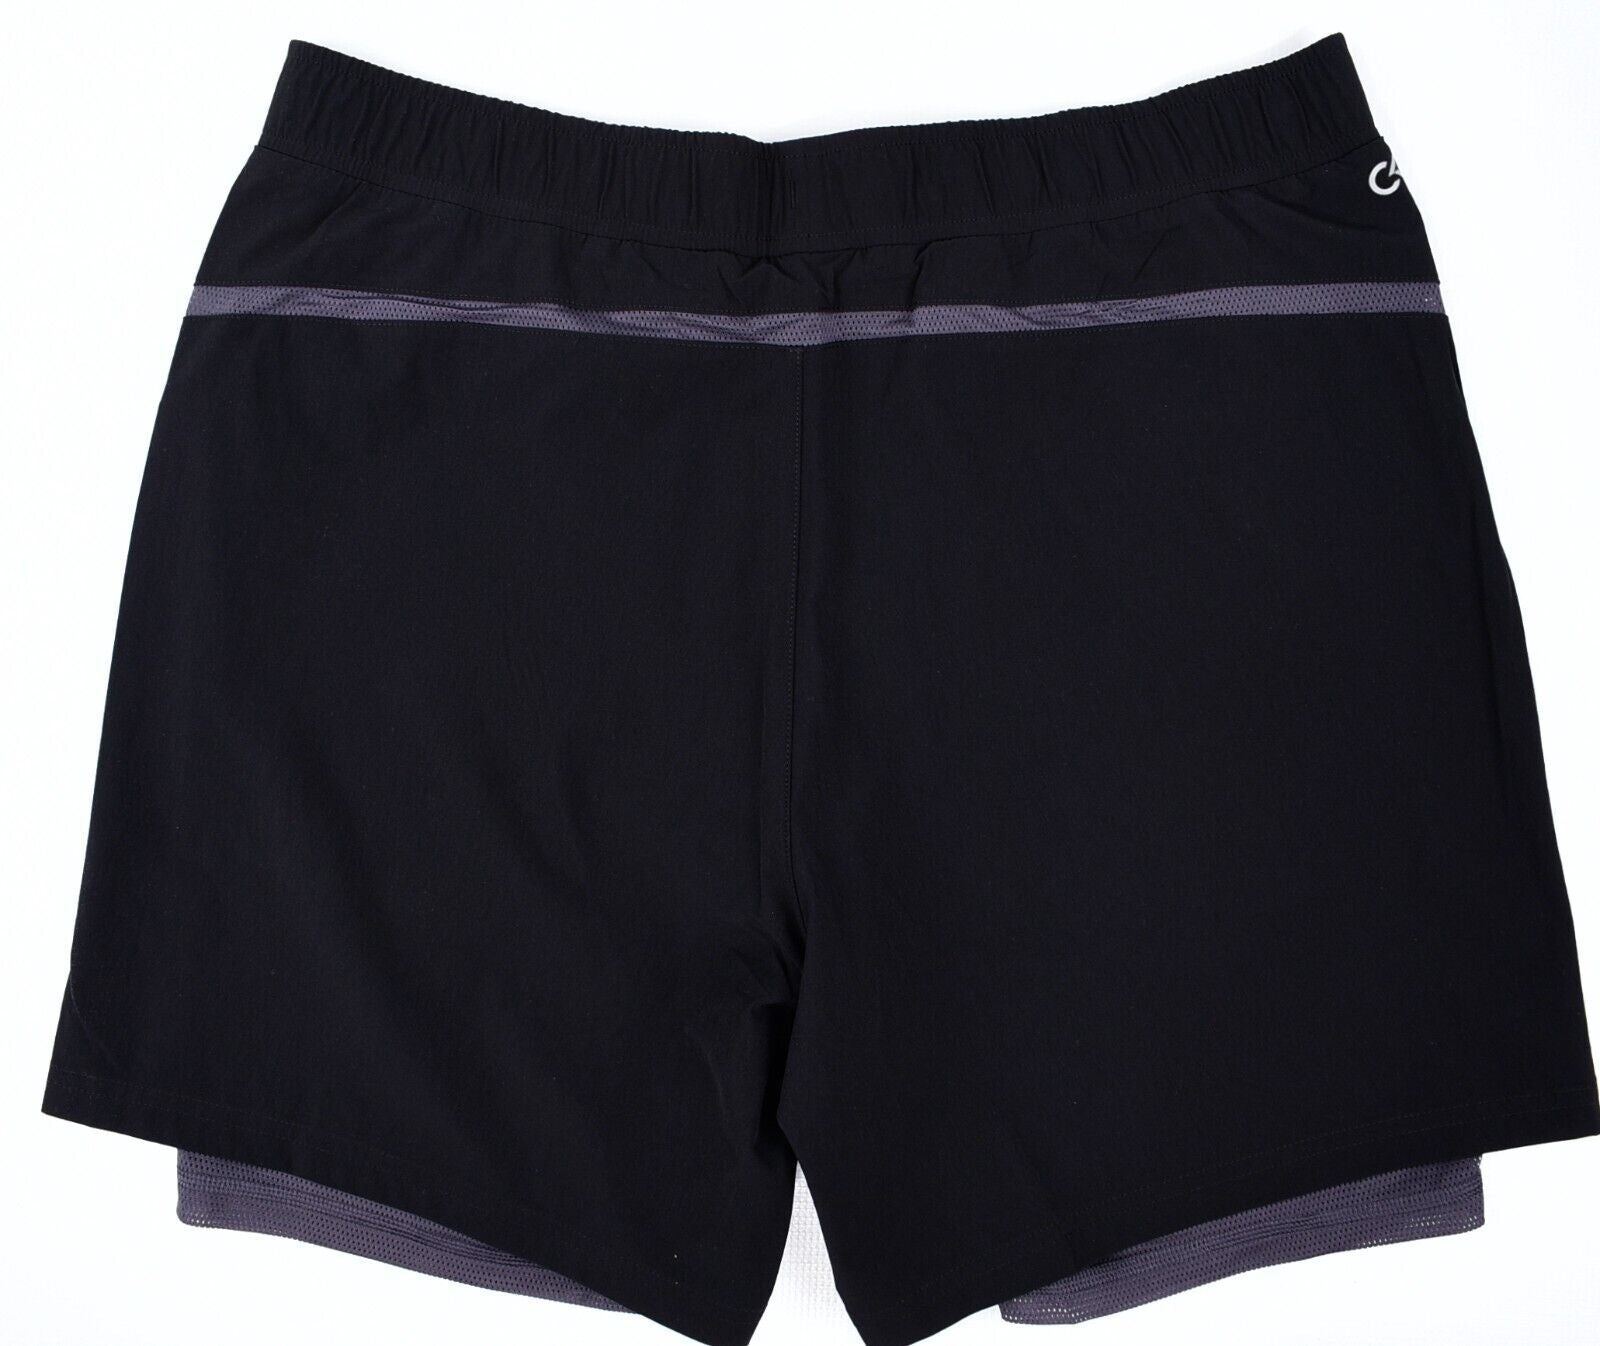 CALVIN KLEIN Performance: Men's 2-in 1 Workout Shorts, Black/Grey, size SMALL